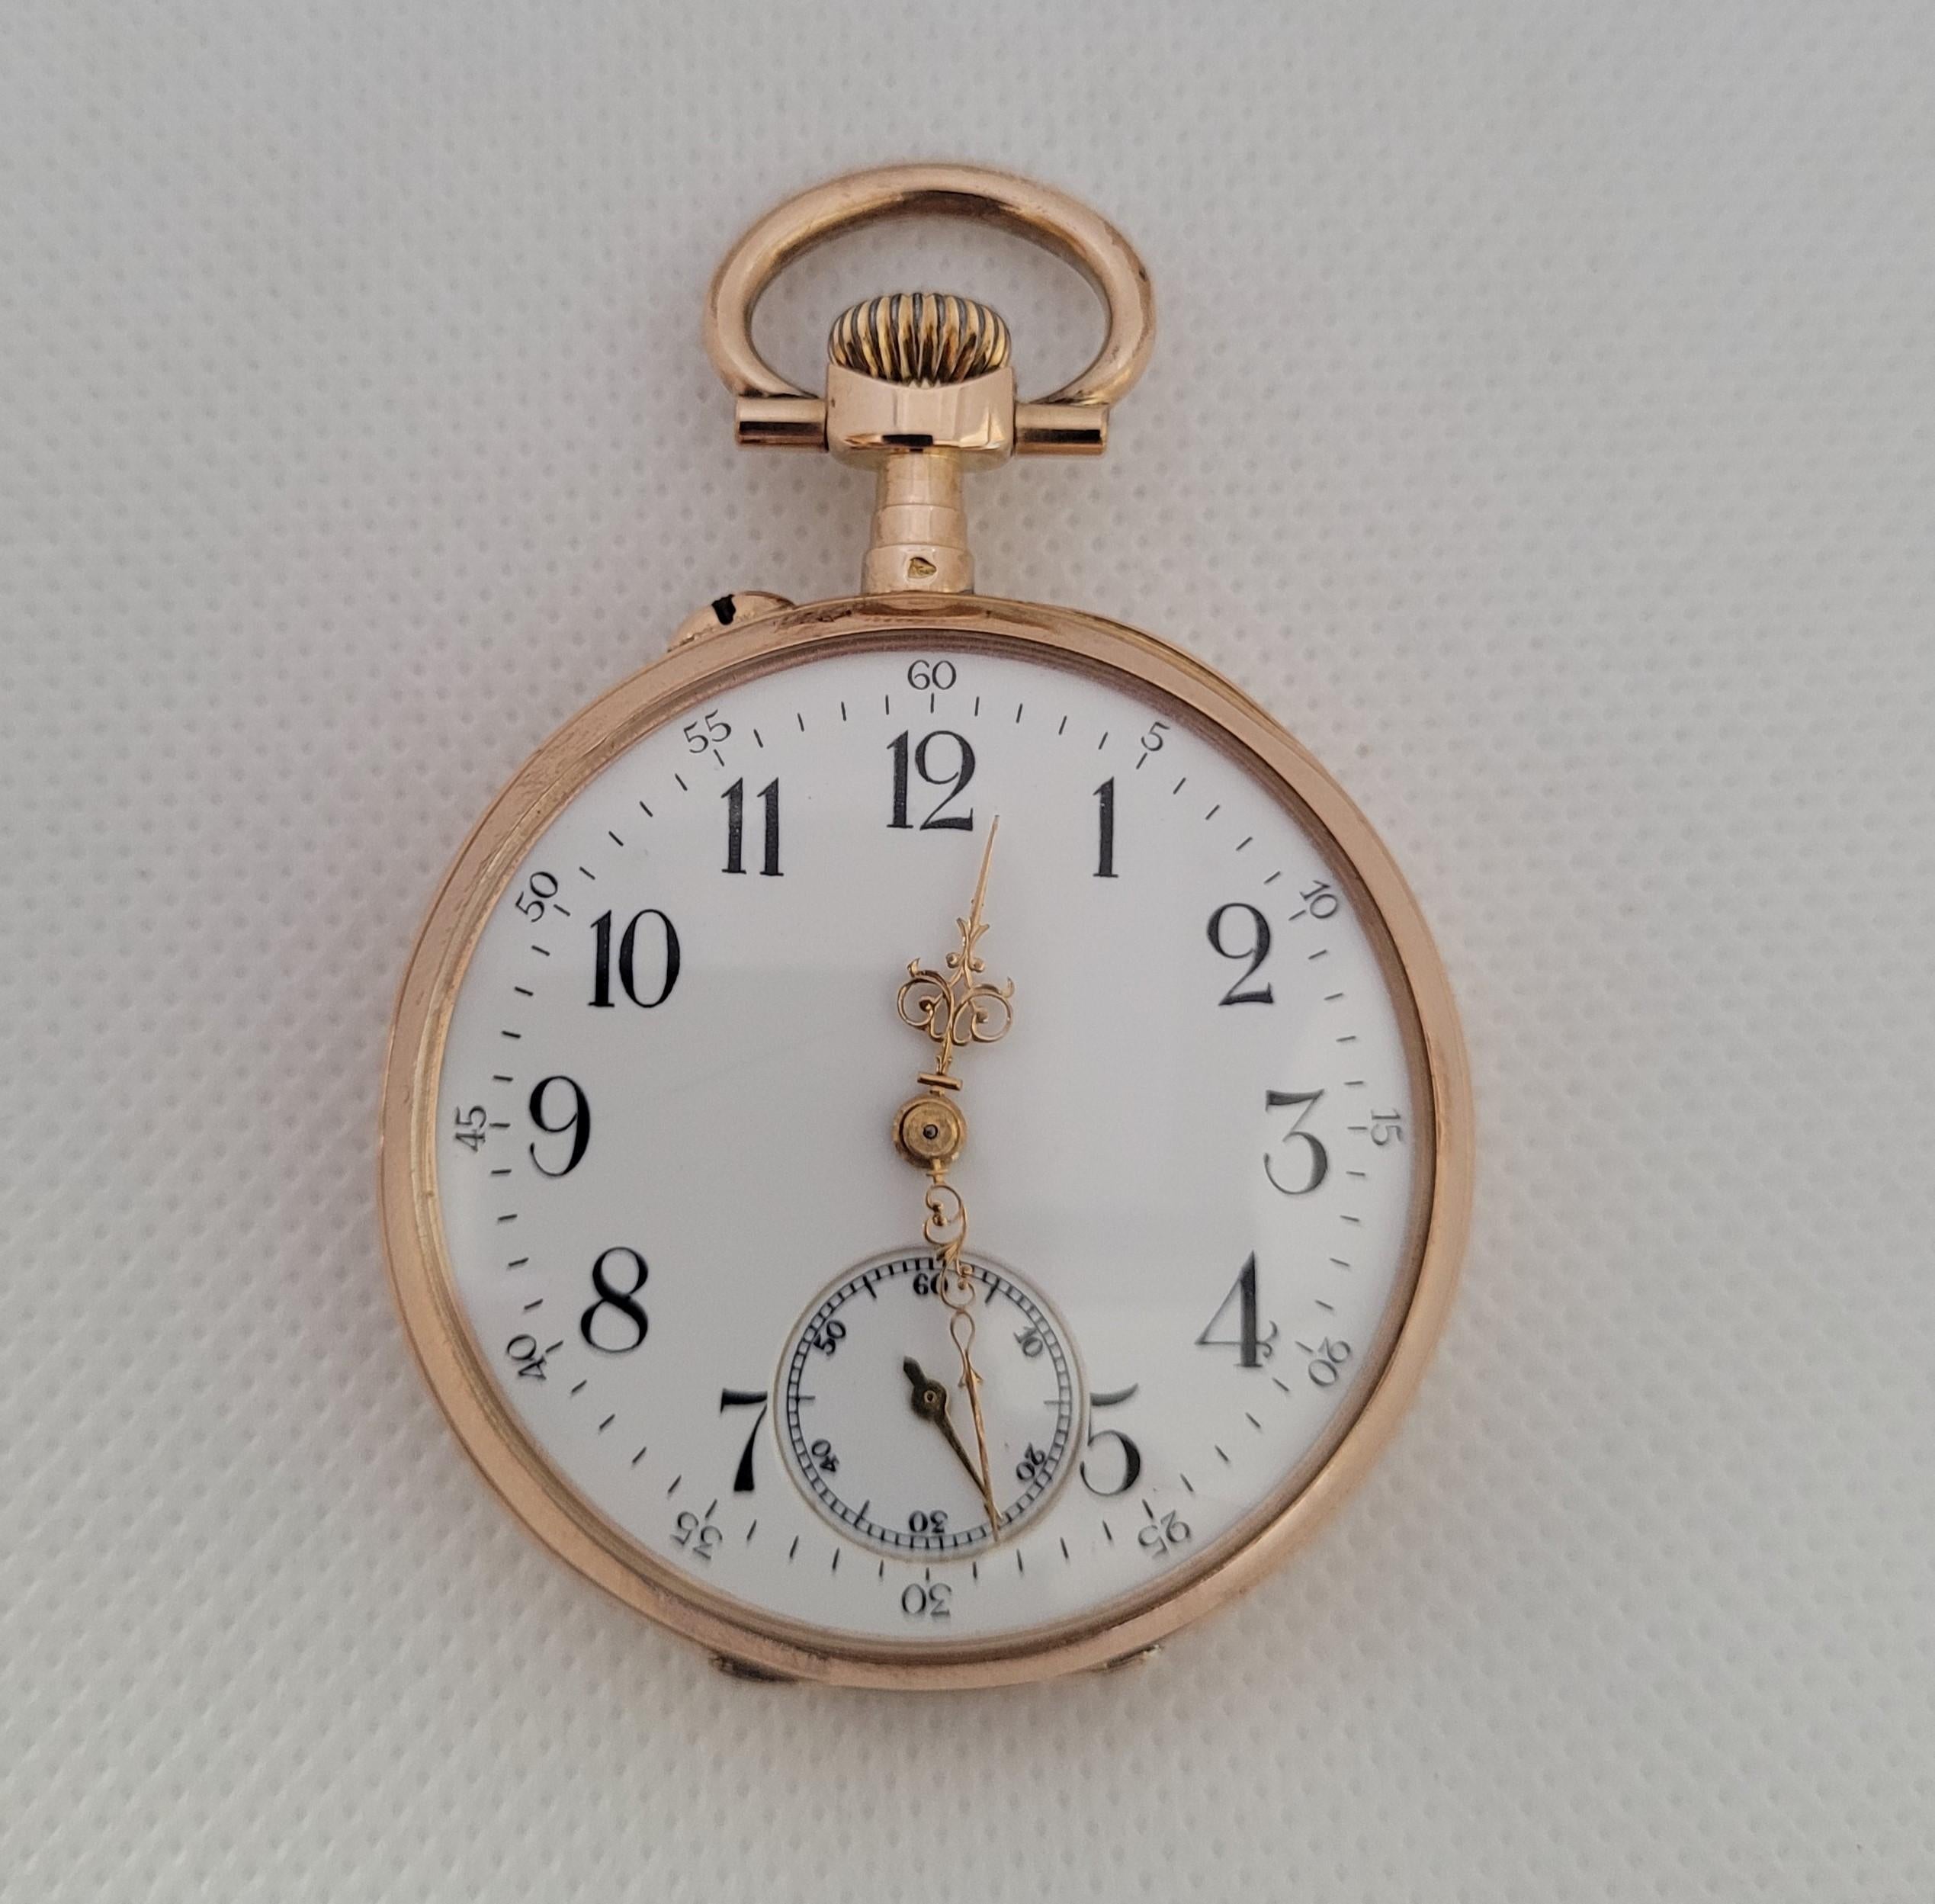 Vintage 44mm 19th Century 18kt Yellow Gold Pocket Watch, Good Working Condition, Case # 68495, Galonne, Very Good Condition, White Face, Black Numerals, Second Hands, Floral Scroll Design on Back. Can be engraved on the back. The crystal is glass